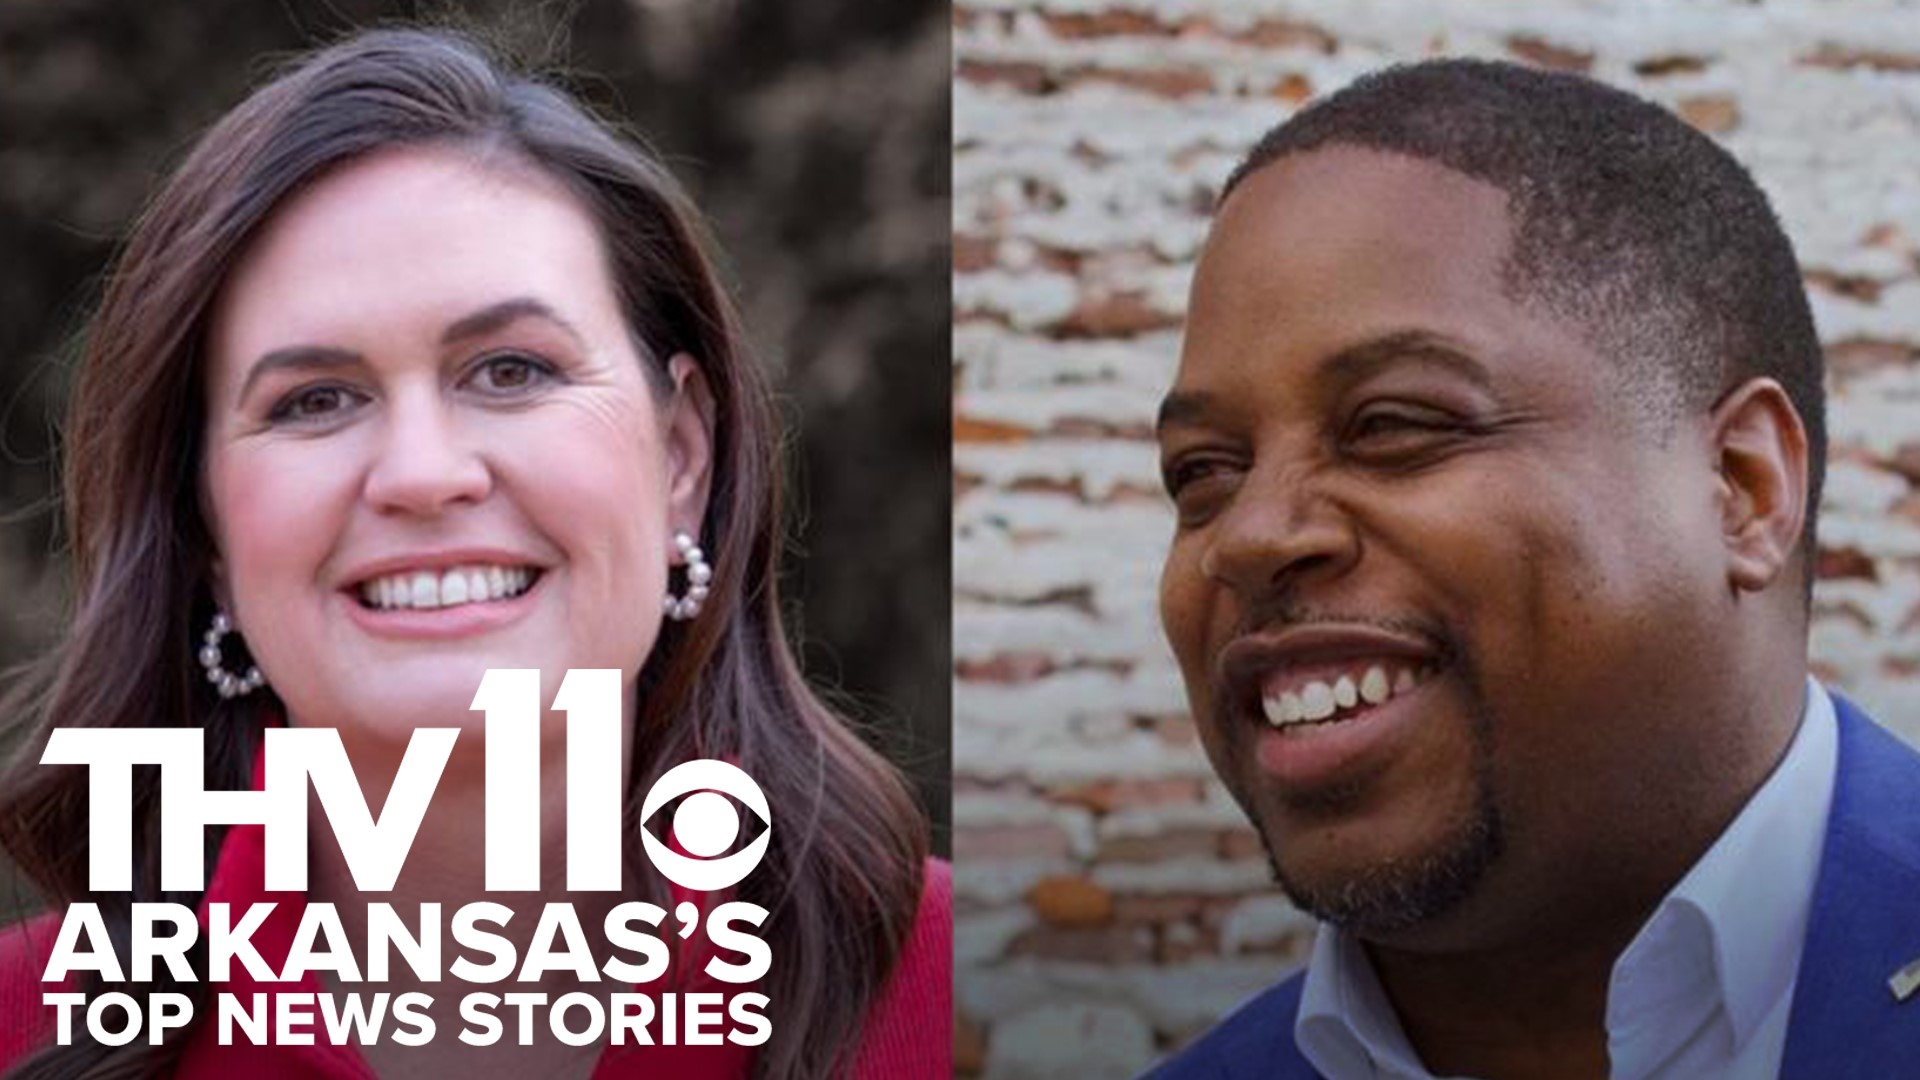 Rolly Hoyt covers Arkansas's top news stories, including Sarah Huckabee Sanders and Chris Jones on the road to being Arkansas' gubernatorial primary candidates.